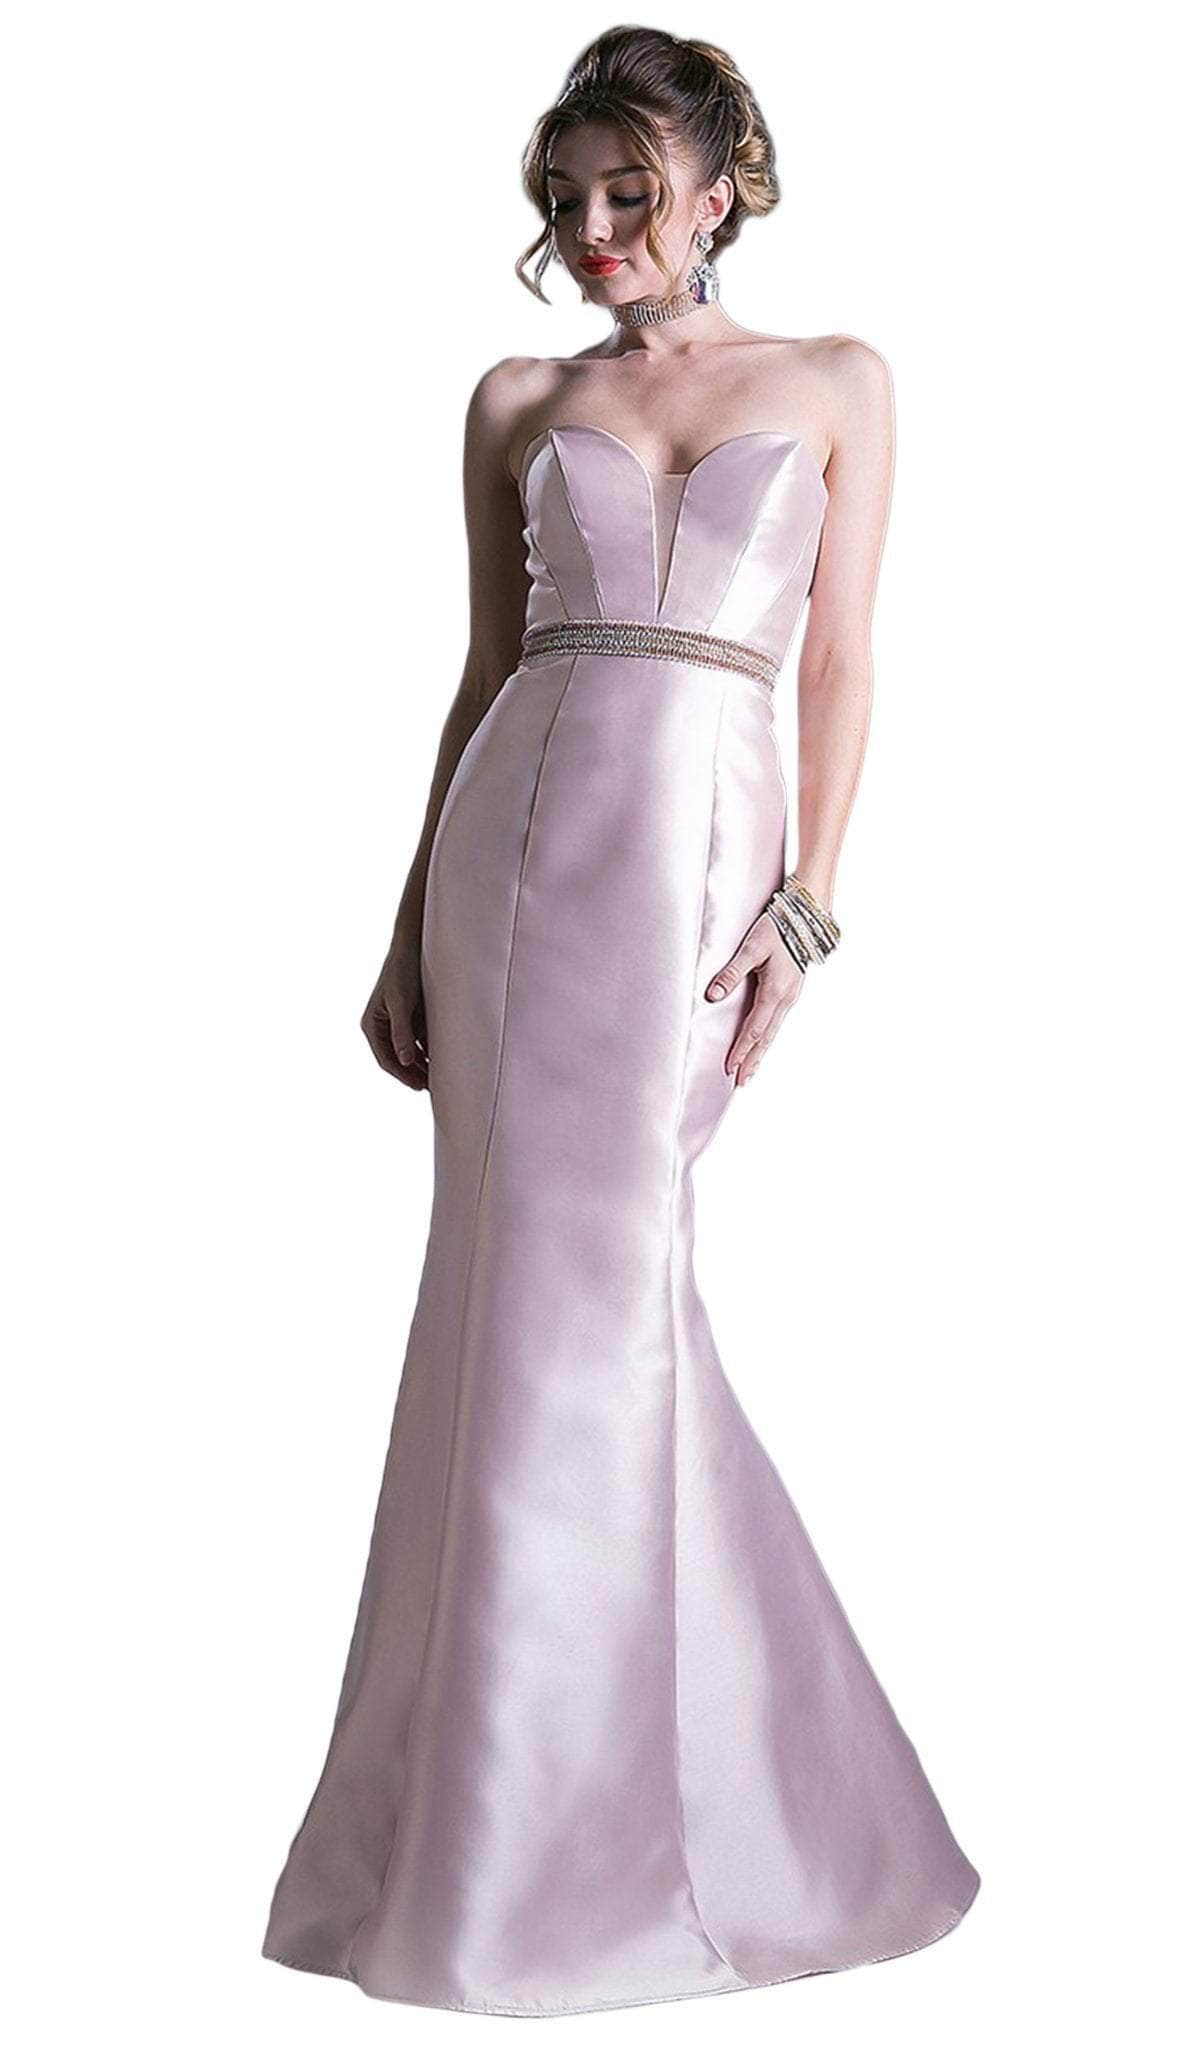 Ladivine ML400 - Strapless Plunging Sweetheart Mermaid Gown
